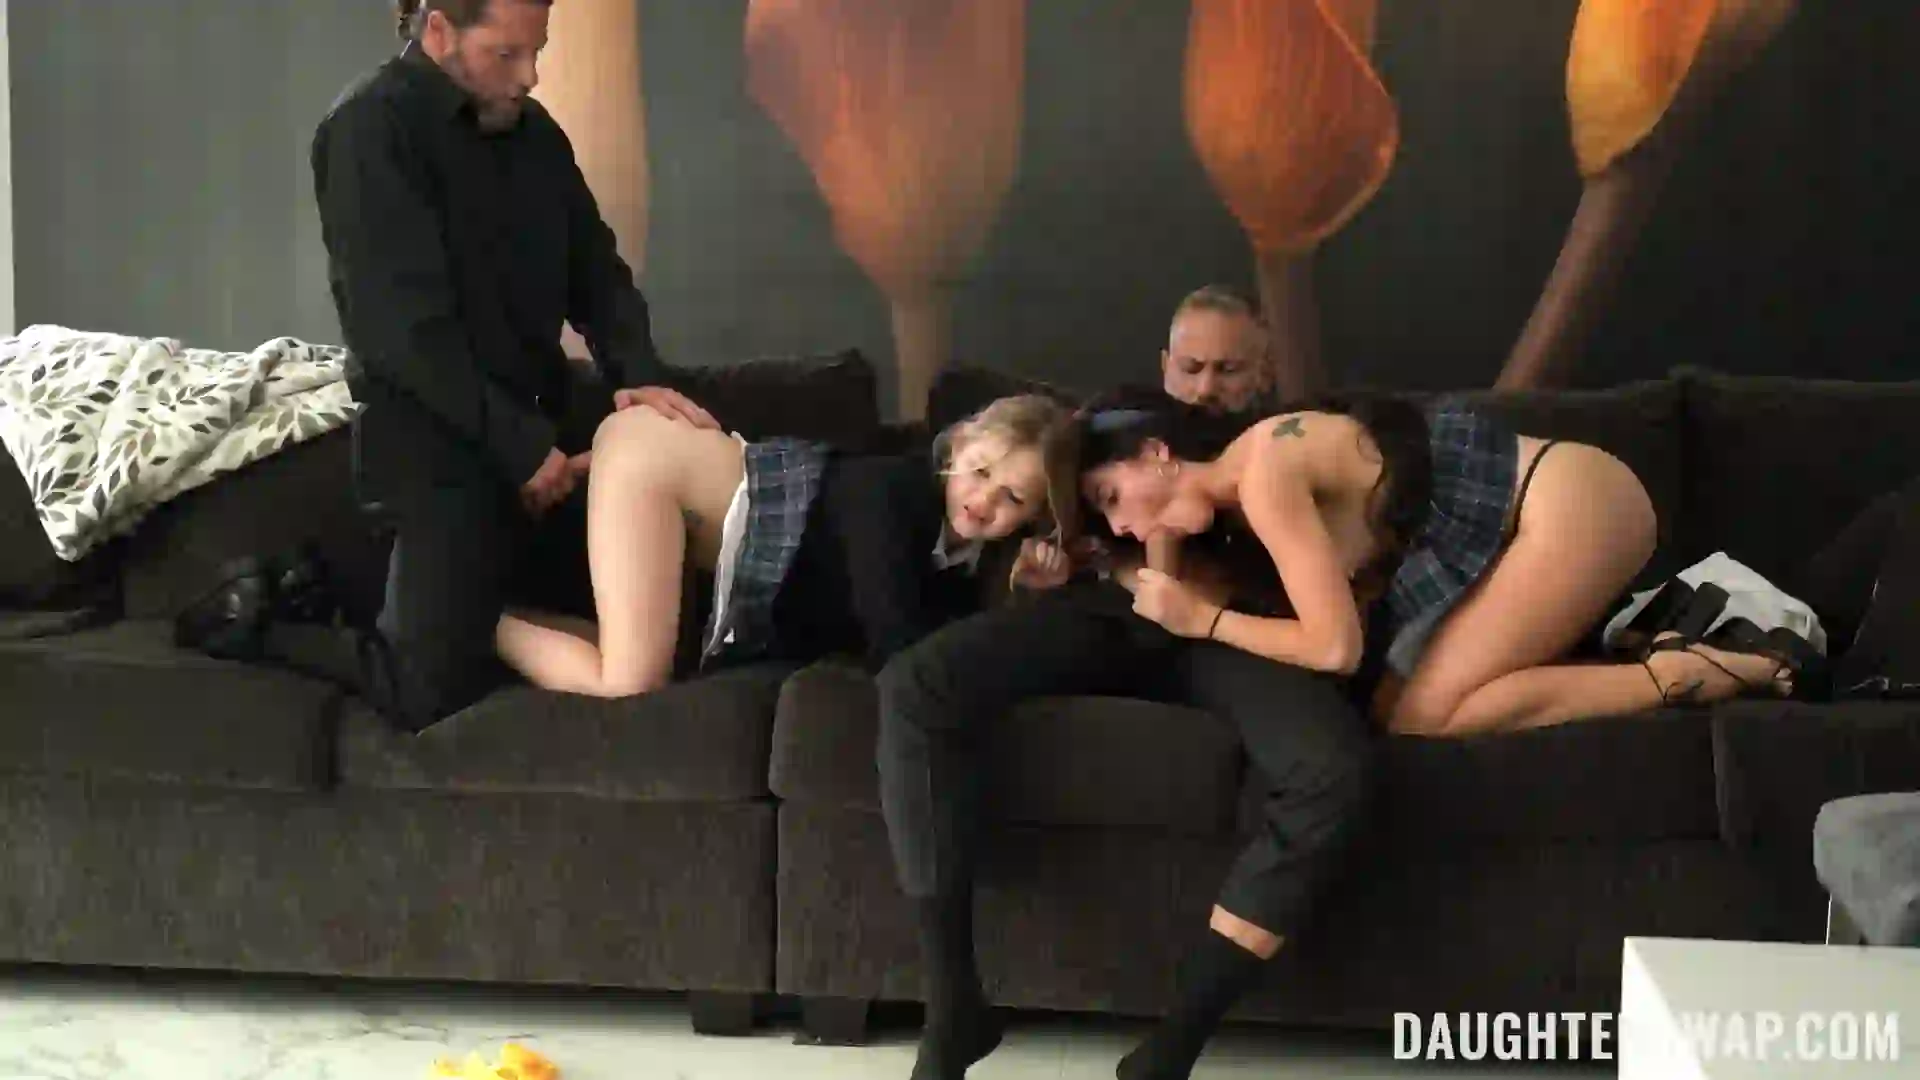 DaughterSwap 22 12 11 Breakthrough Session A Deep Analysis Extended Cut XXX 1080p MP4